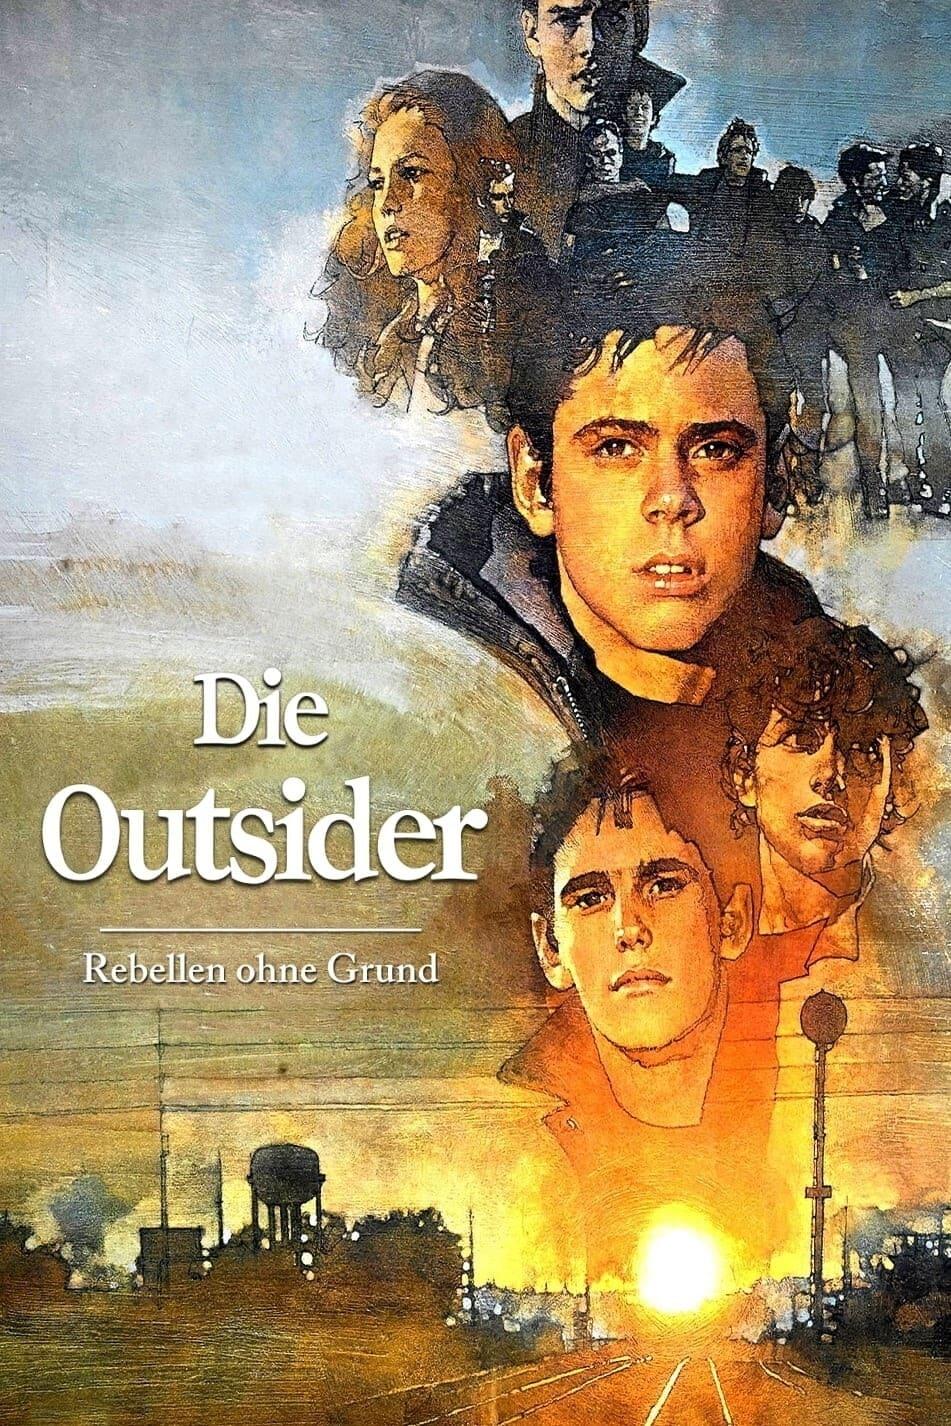 Die Outsider poster